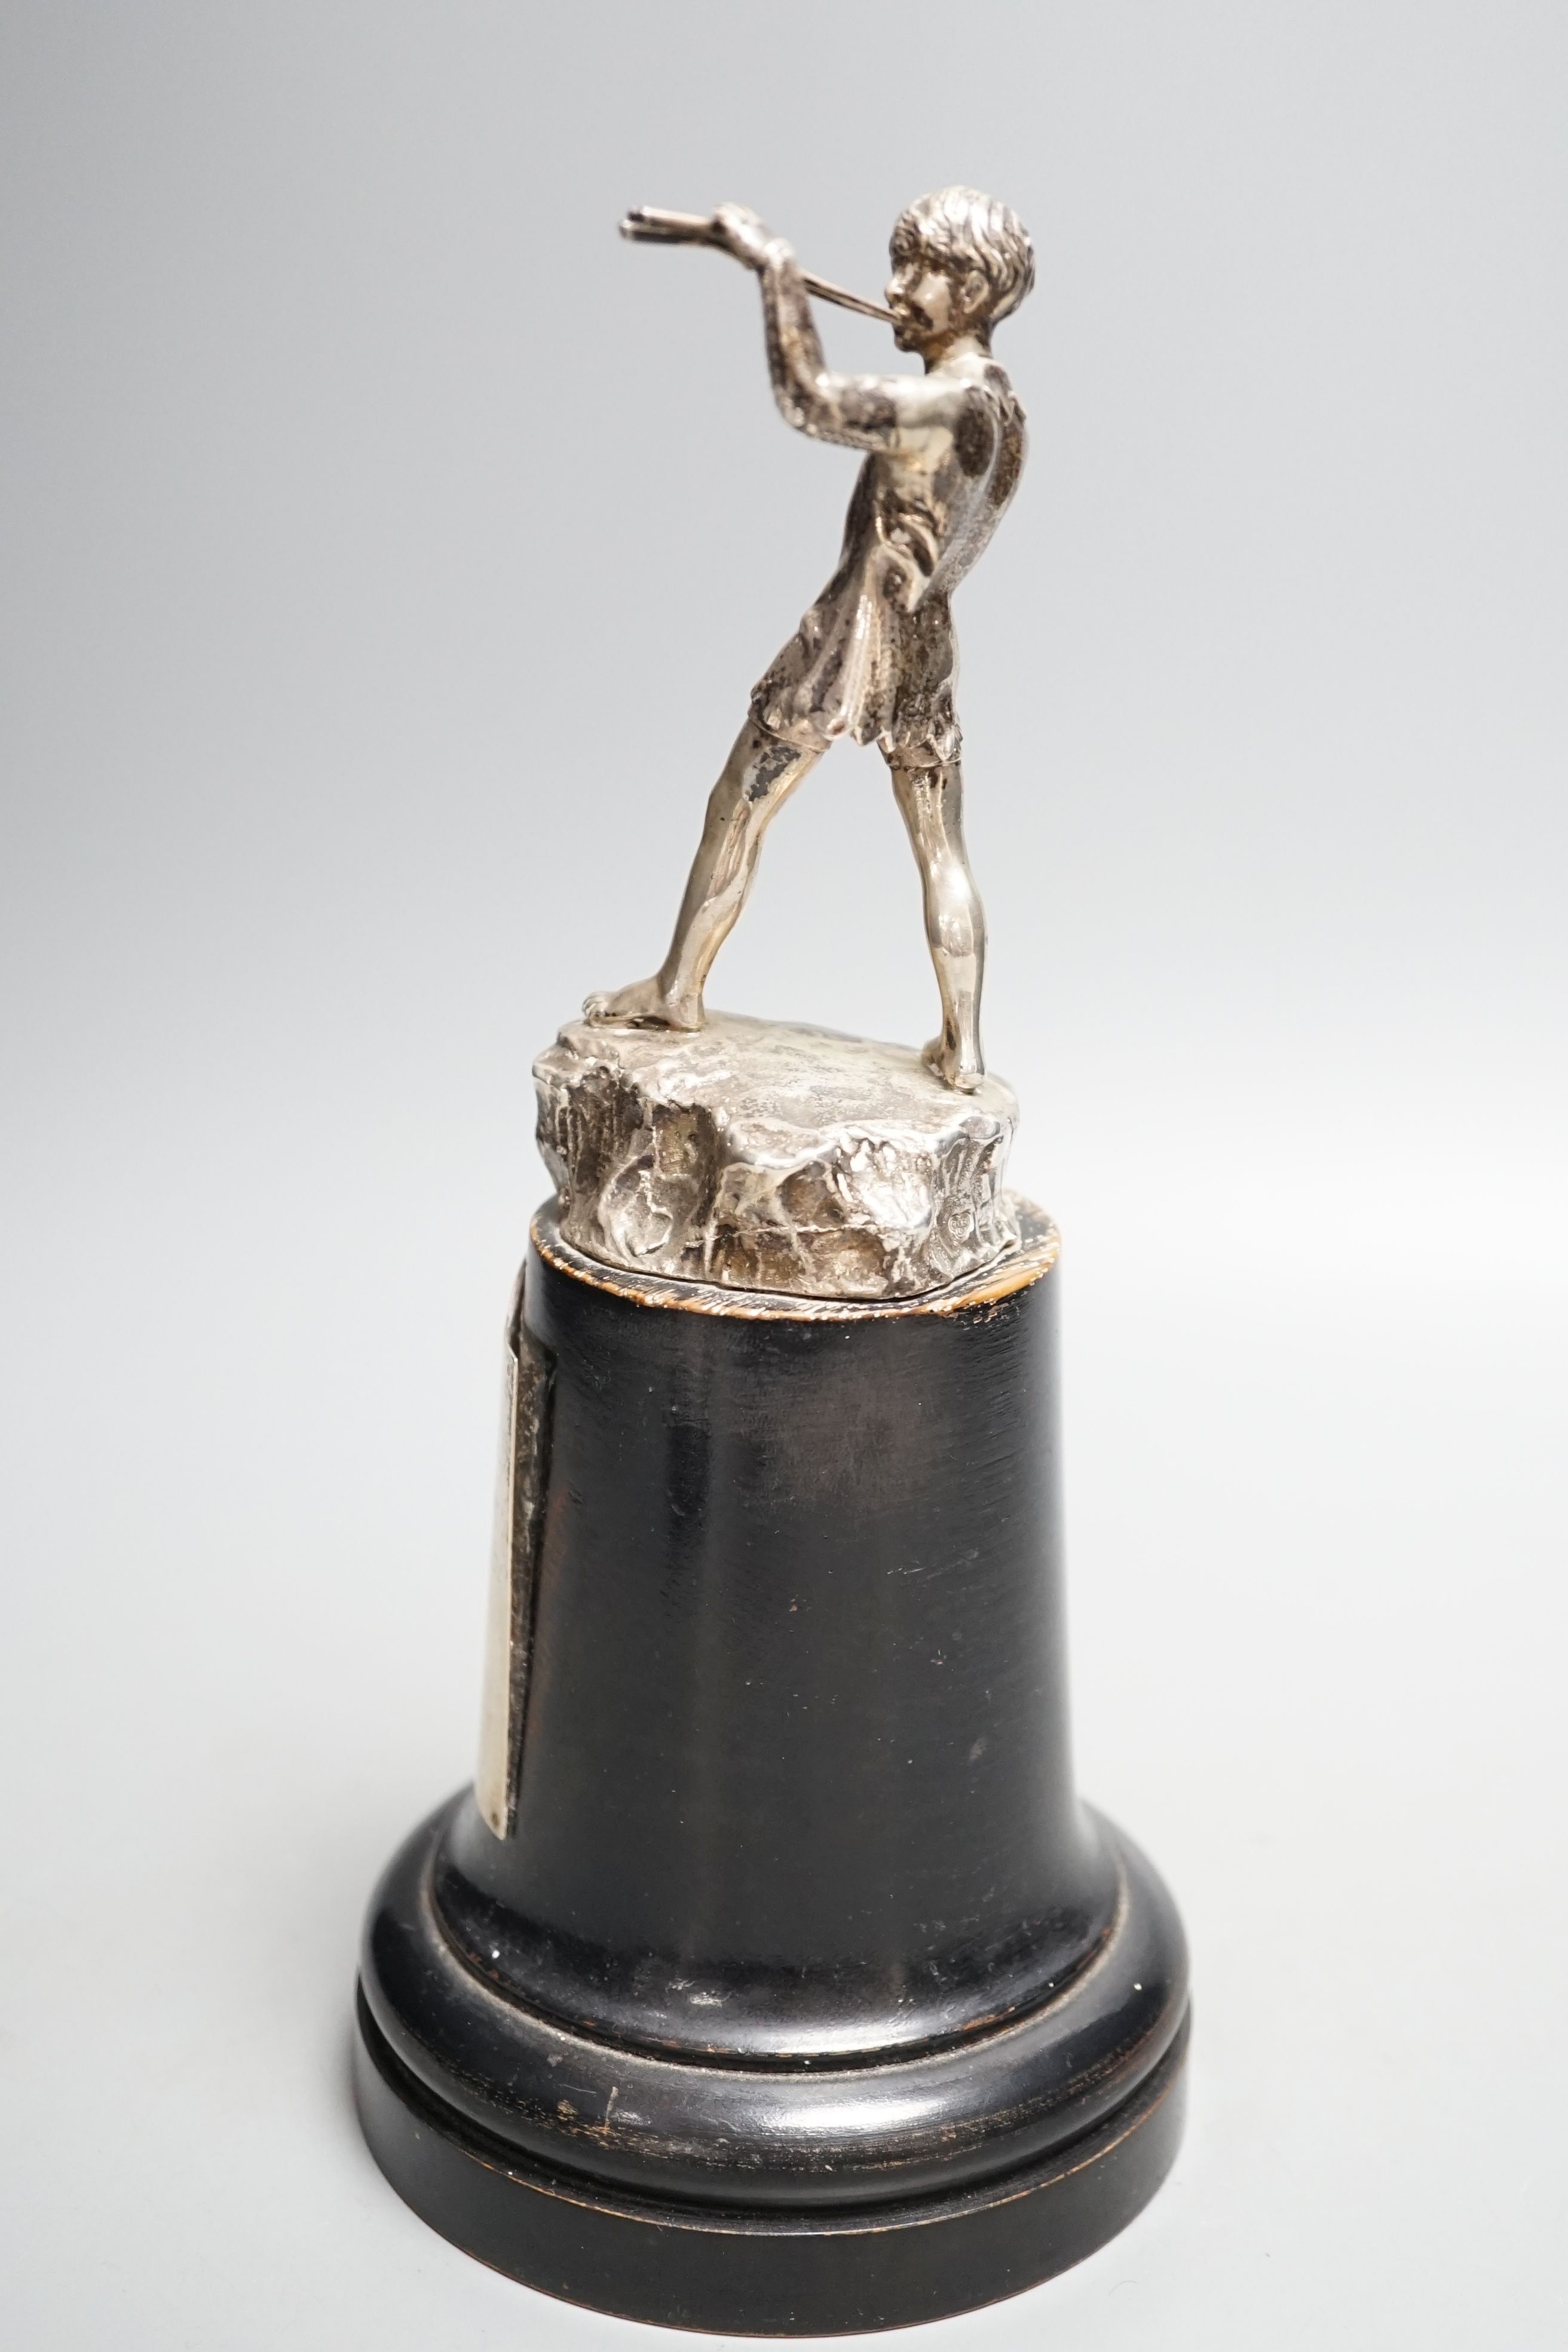 A late 1940's silver presentation figure of a young boy playing the pipes, on a rocky base, Goldsmiths & Silversmiths Co Ltd, London, 1949, on a wooden plinth with engraved presentation plaque, overall height 23.5cm